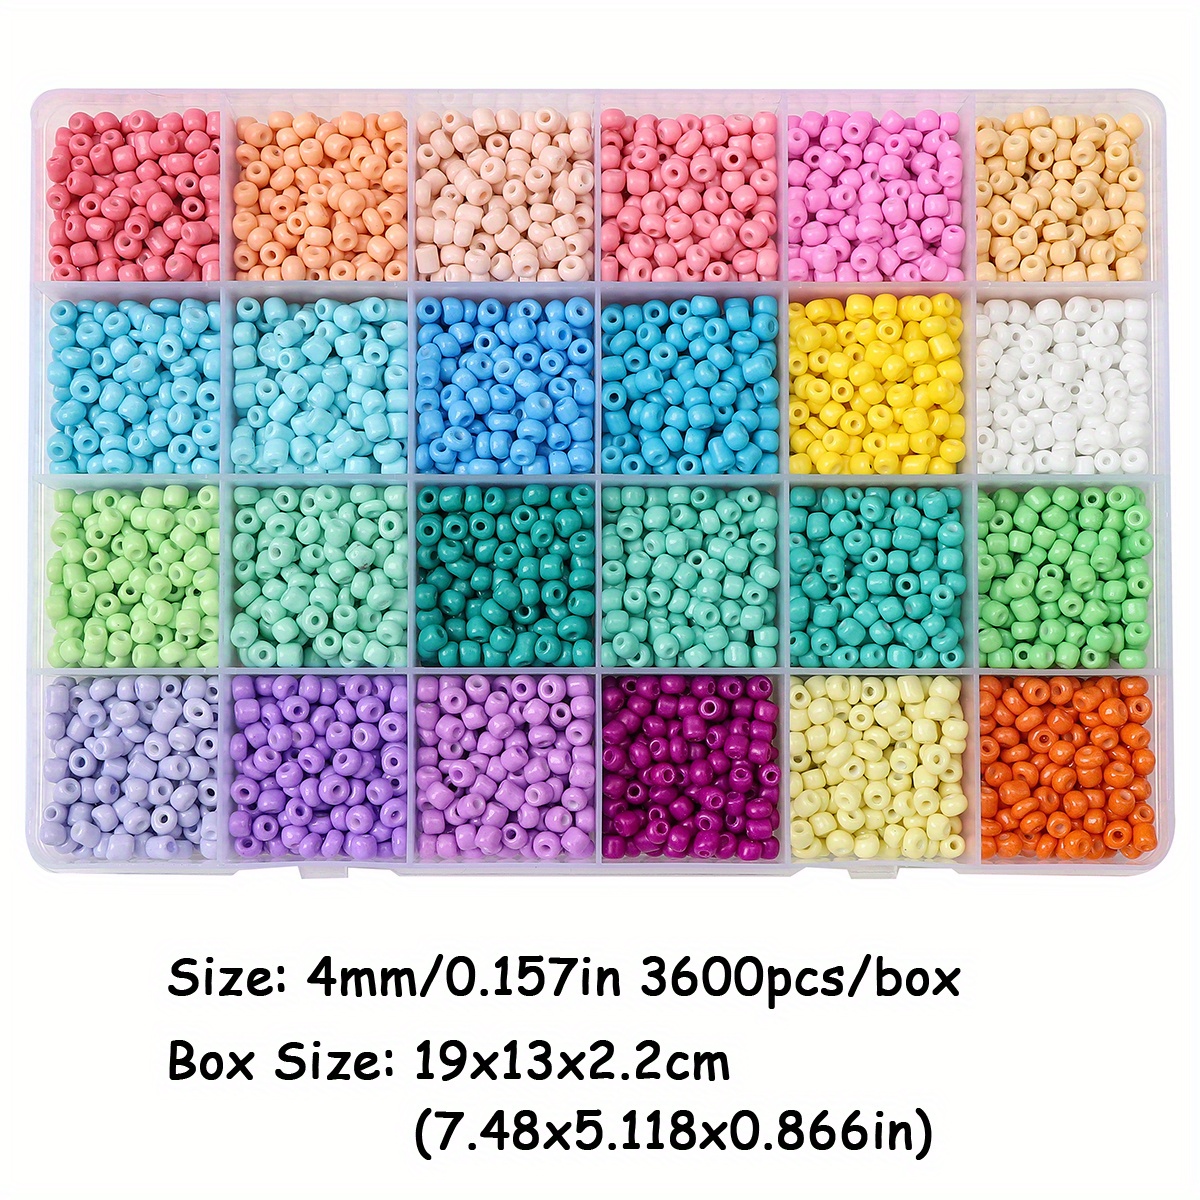 8000pcs 24 Colors 2mm Small Glass Seed Beads Tiny Waist Beads For Jewelry  Making DIY Friendship Necklace Bracelet Making Kit Girls Craft Supplies